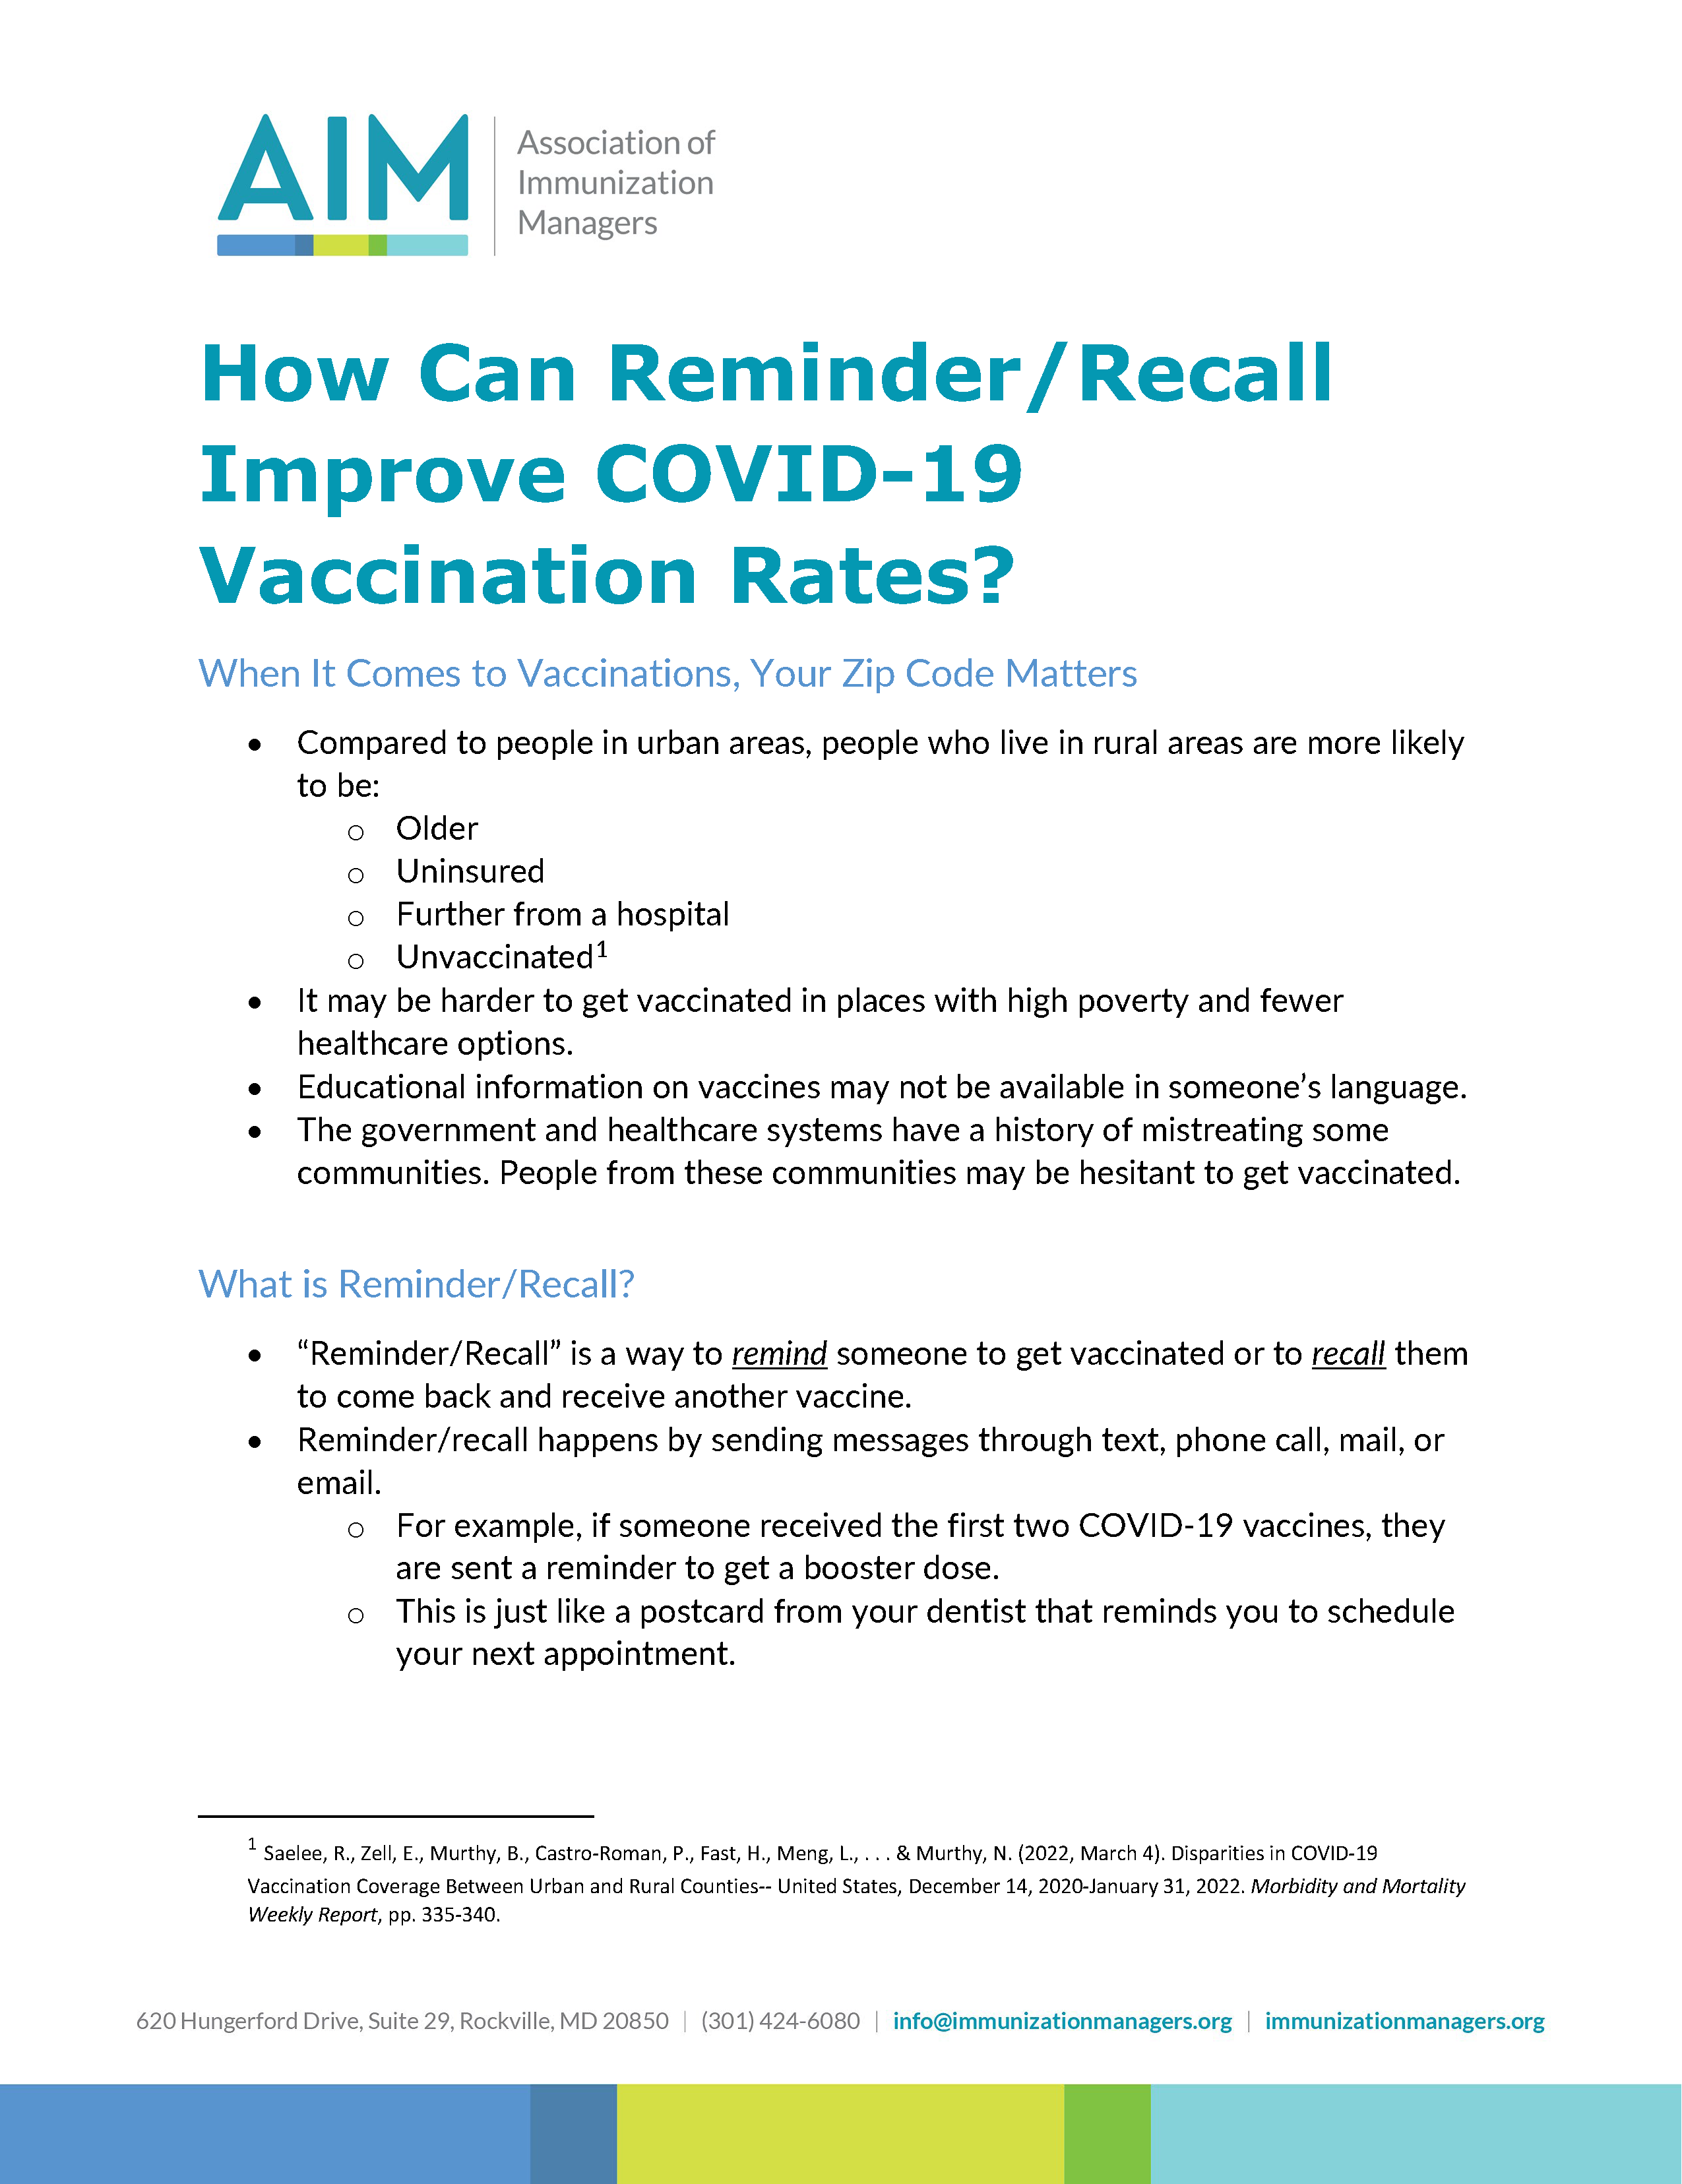 How can Reminder / Recall improve covid-19 vaccination rates?